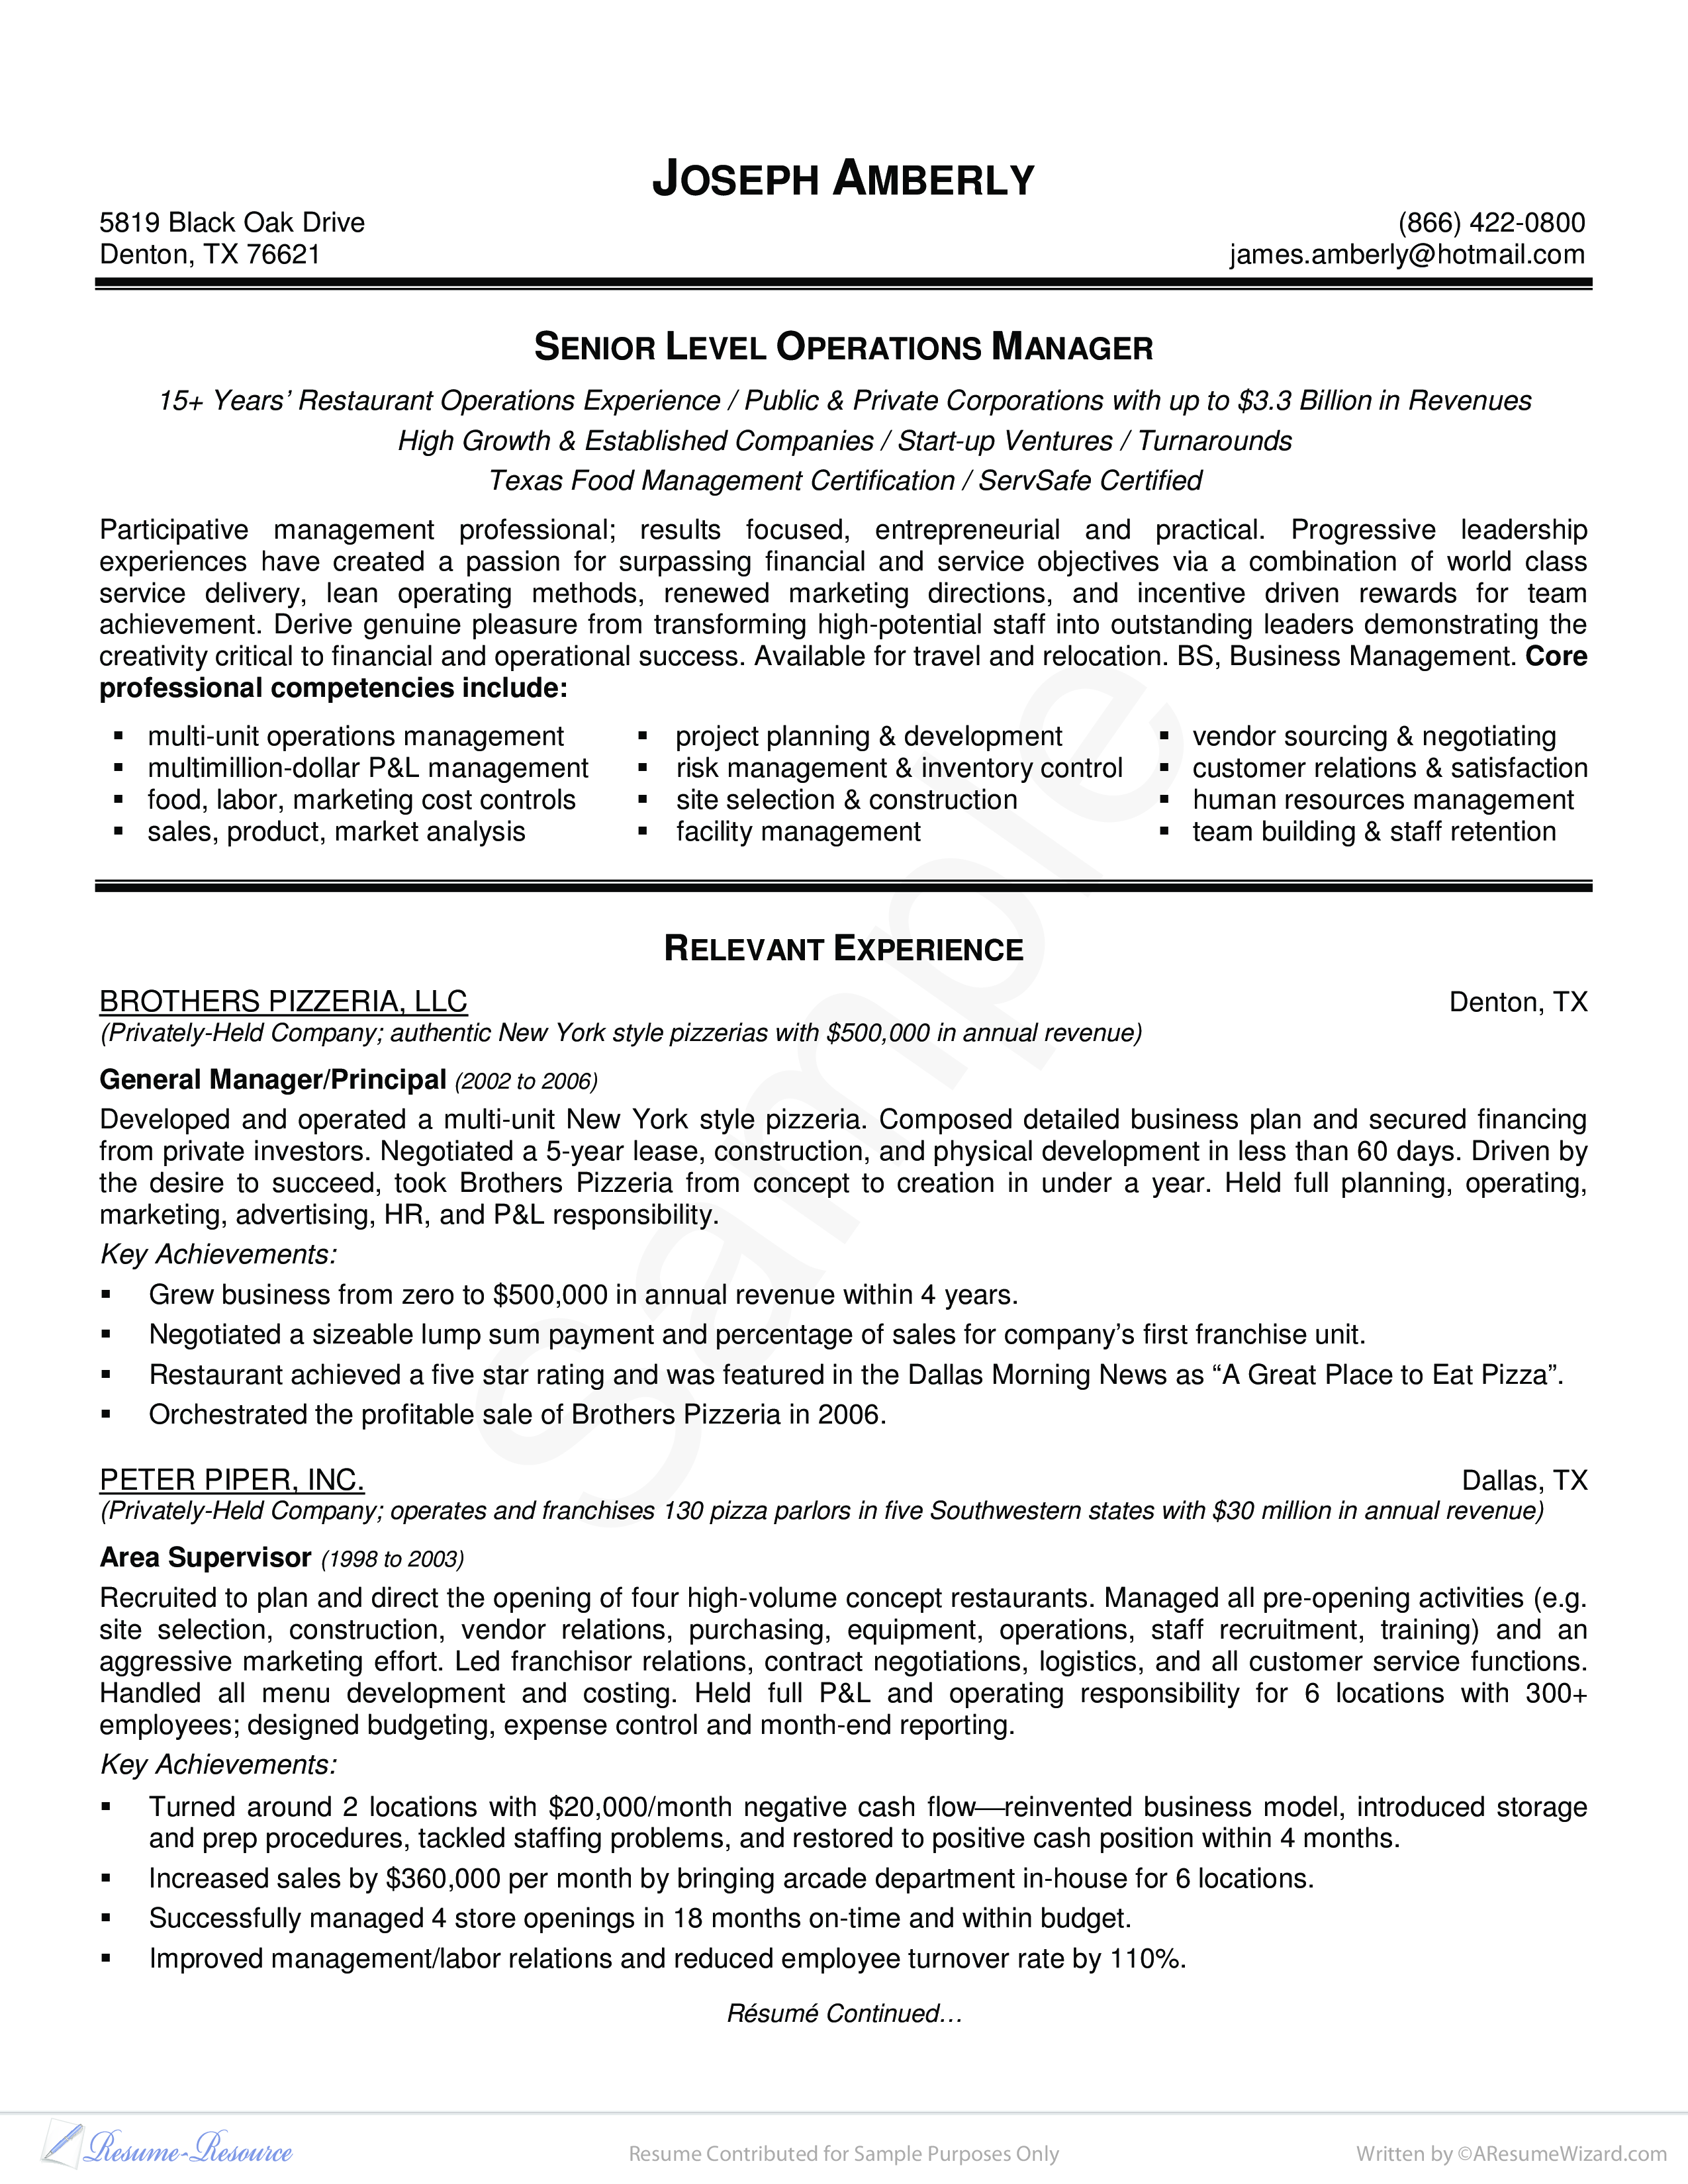 Operations Manager Resume Sample 模板